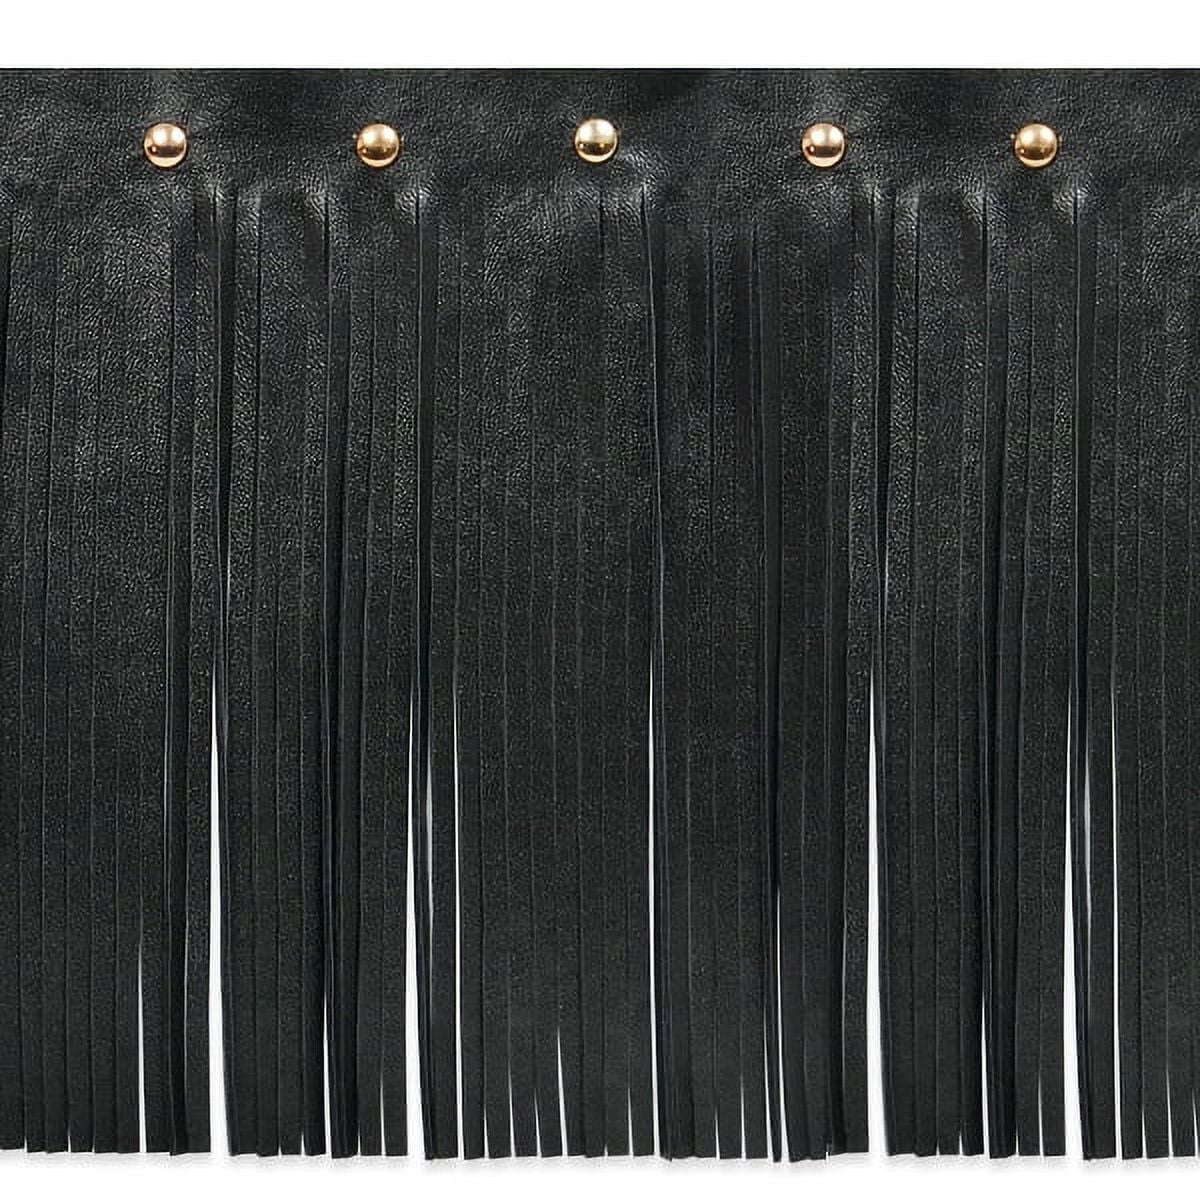 Expo Int'l 5 Faux Leather Fringe w/ Studded Header by The Yard, Black